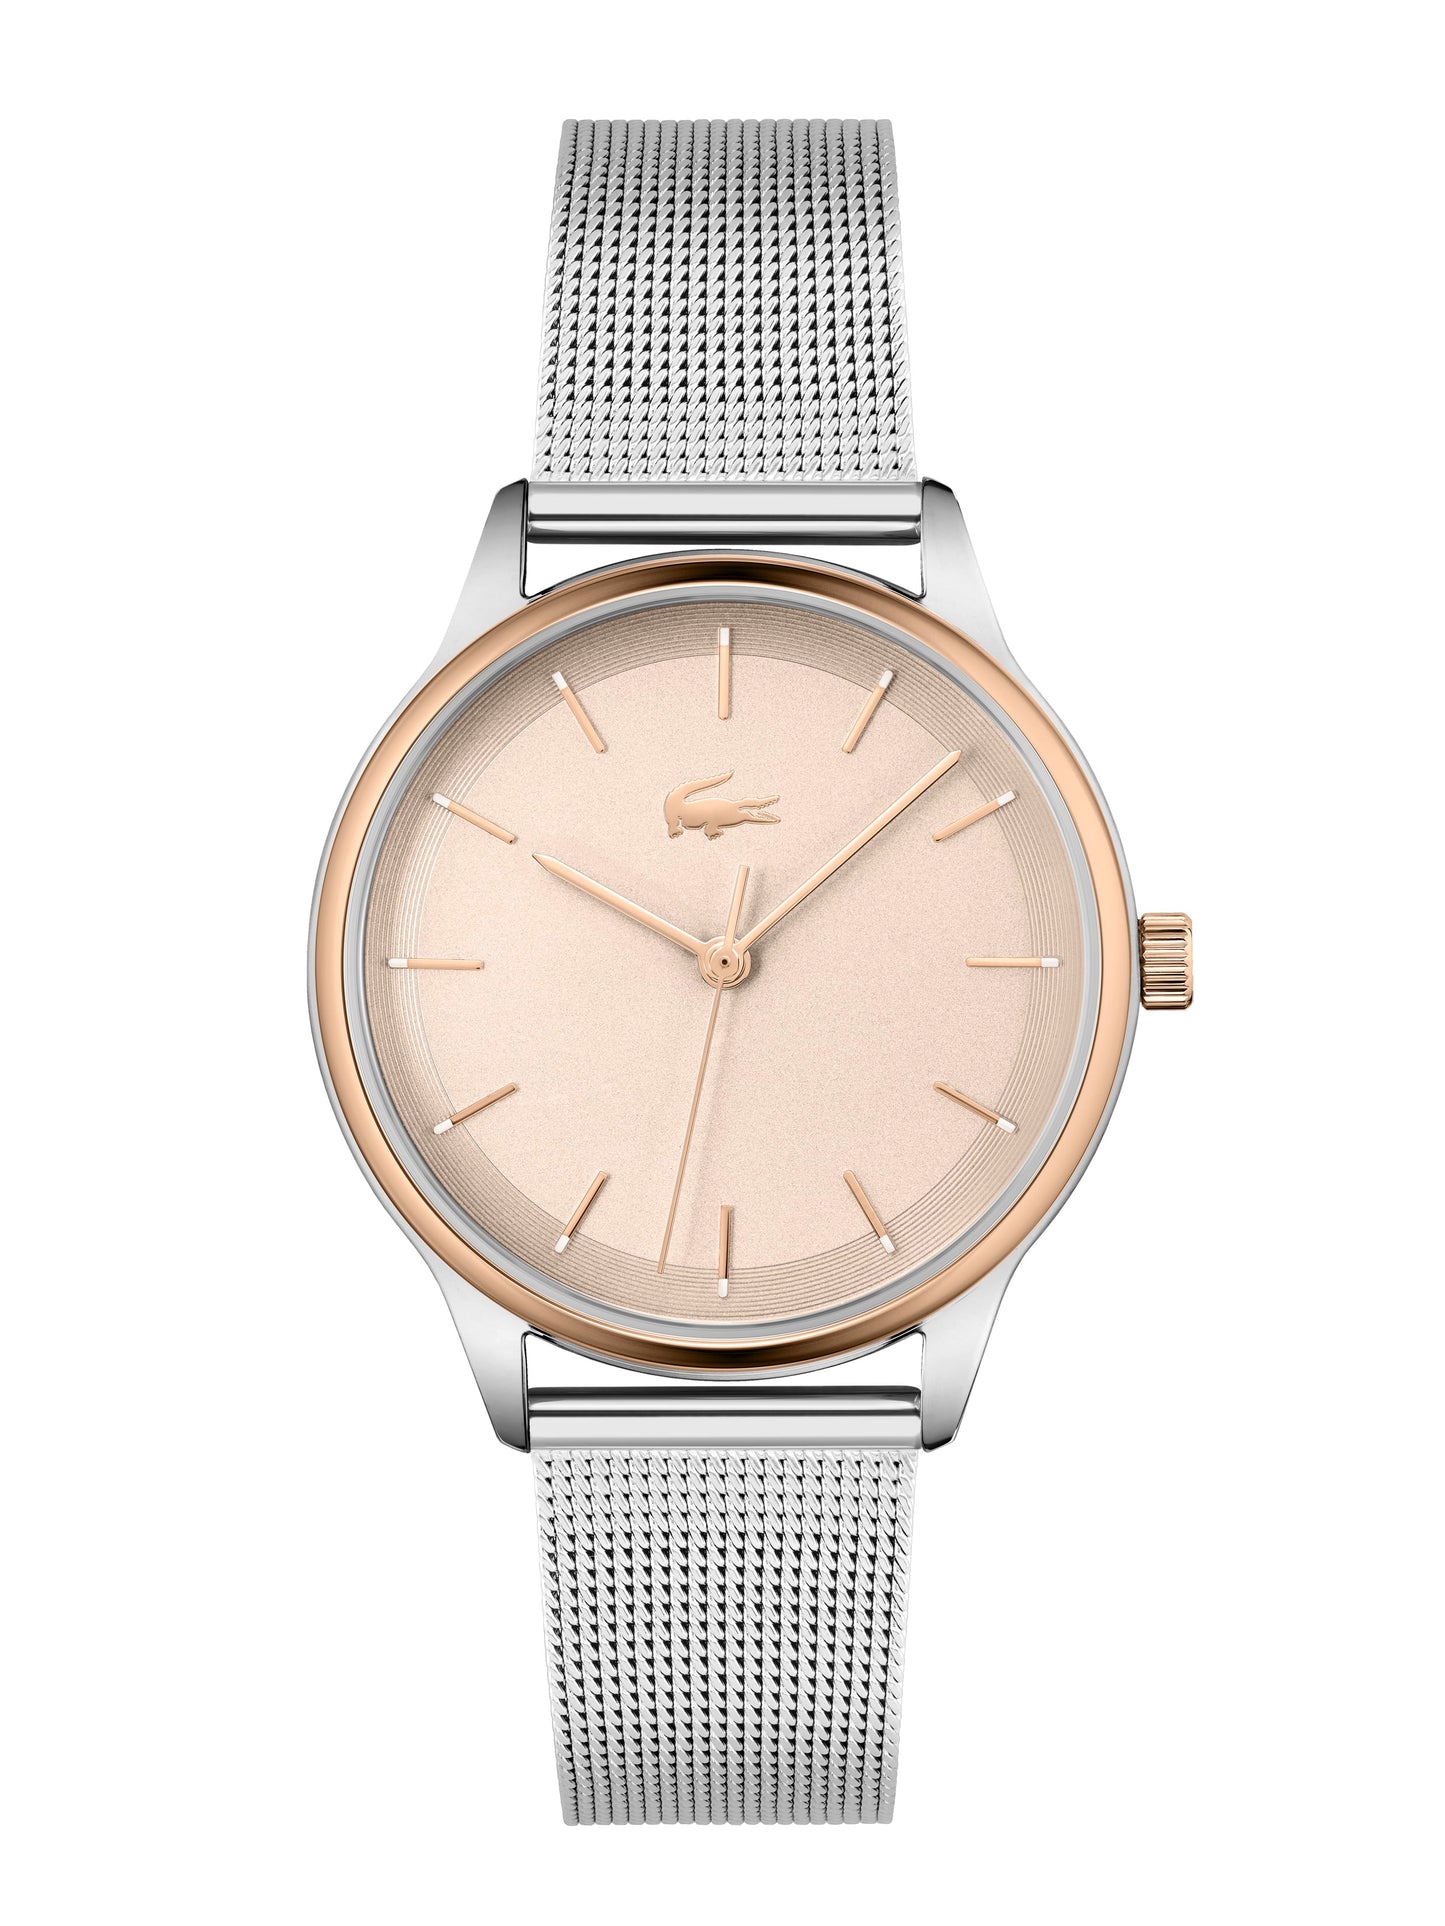 An internationally guaranteed Lacoste Women's Club Blush Watch 2001257 with a white dial and silver mesh strap.